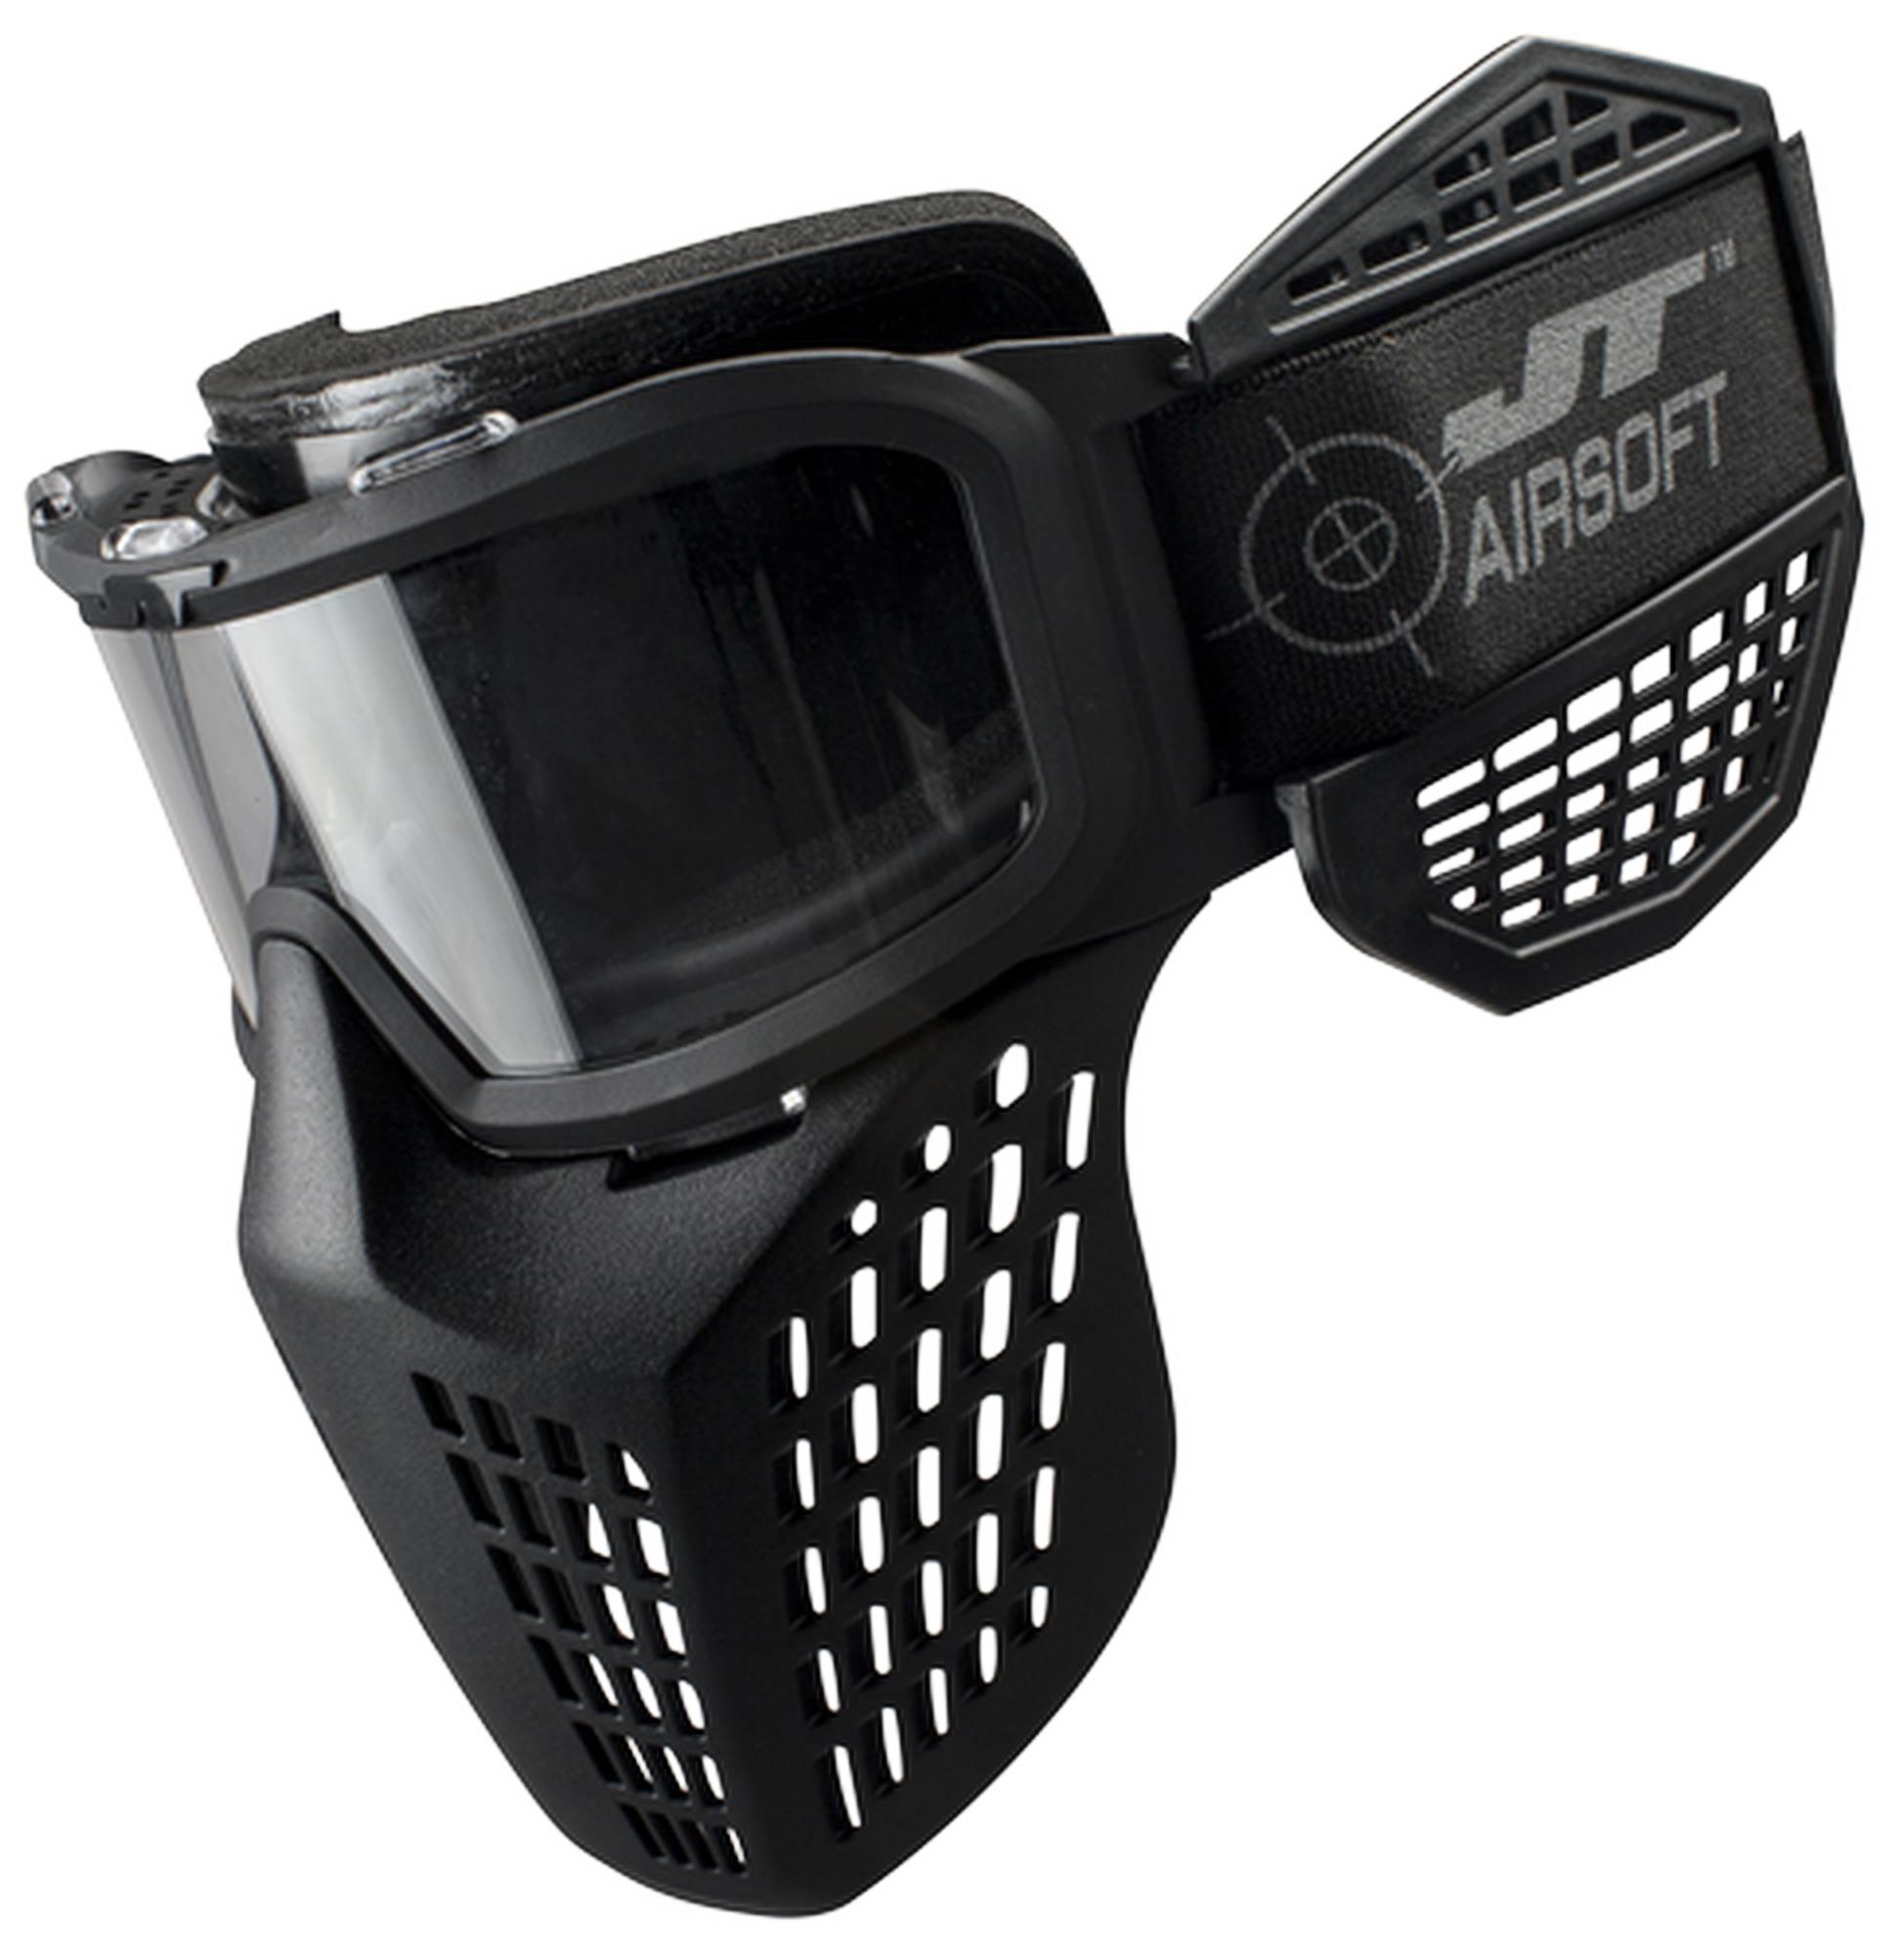 JT Delta 3 Full Face Airsoft Mask